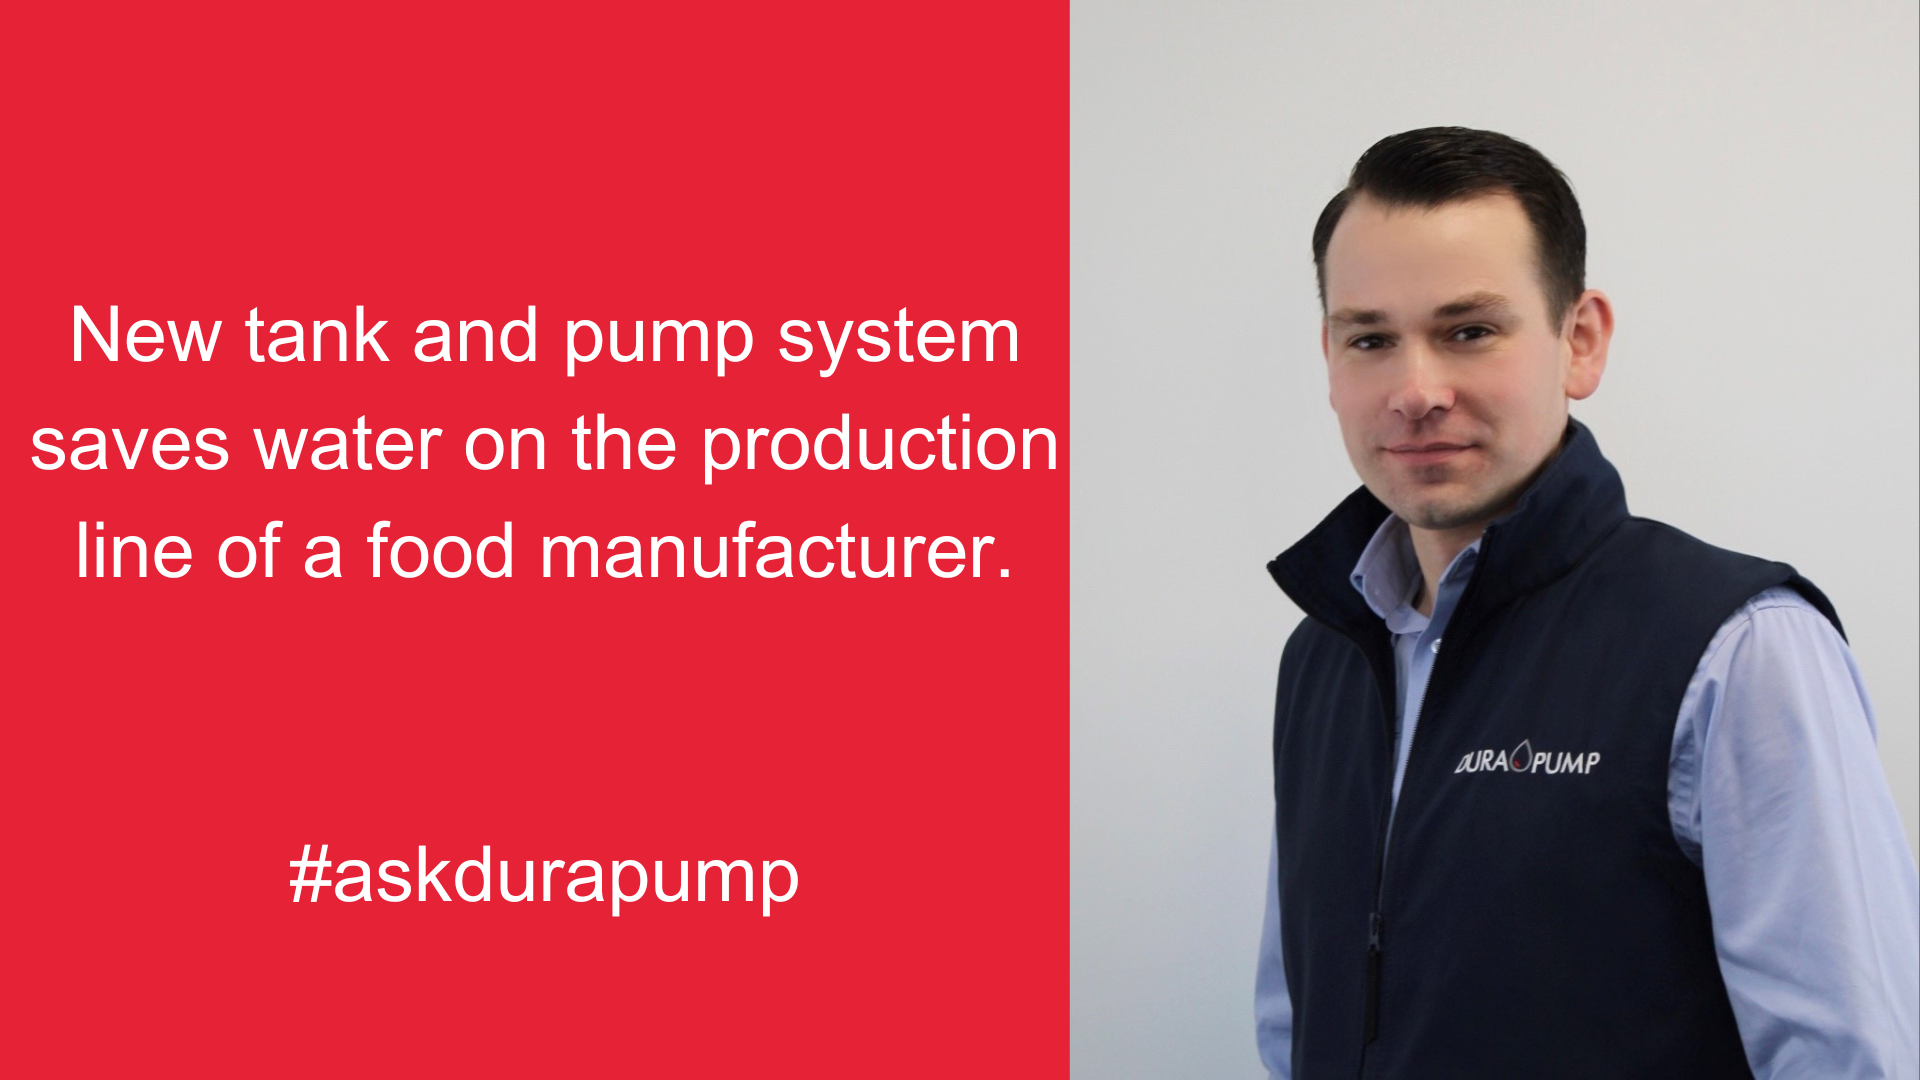 Video of Ross demonstrating a pump solution for food manufacturer